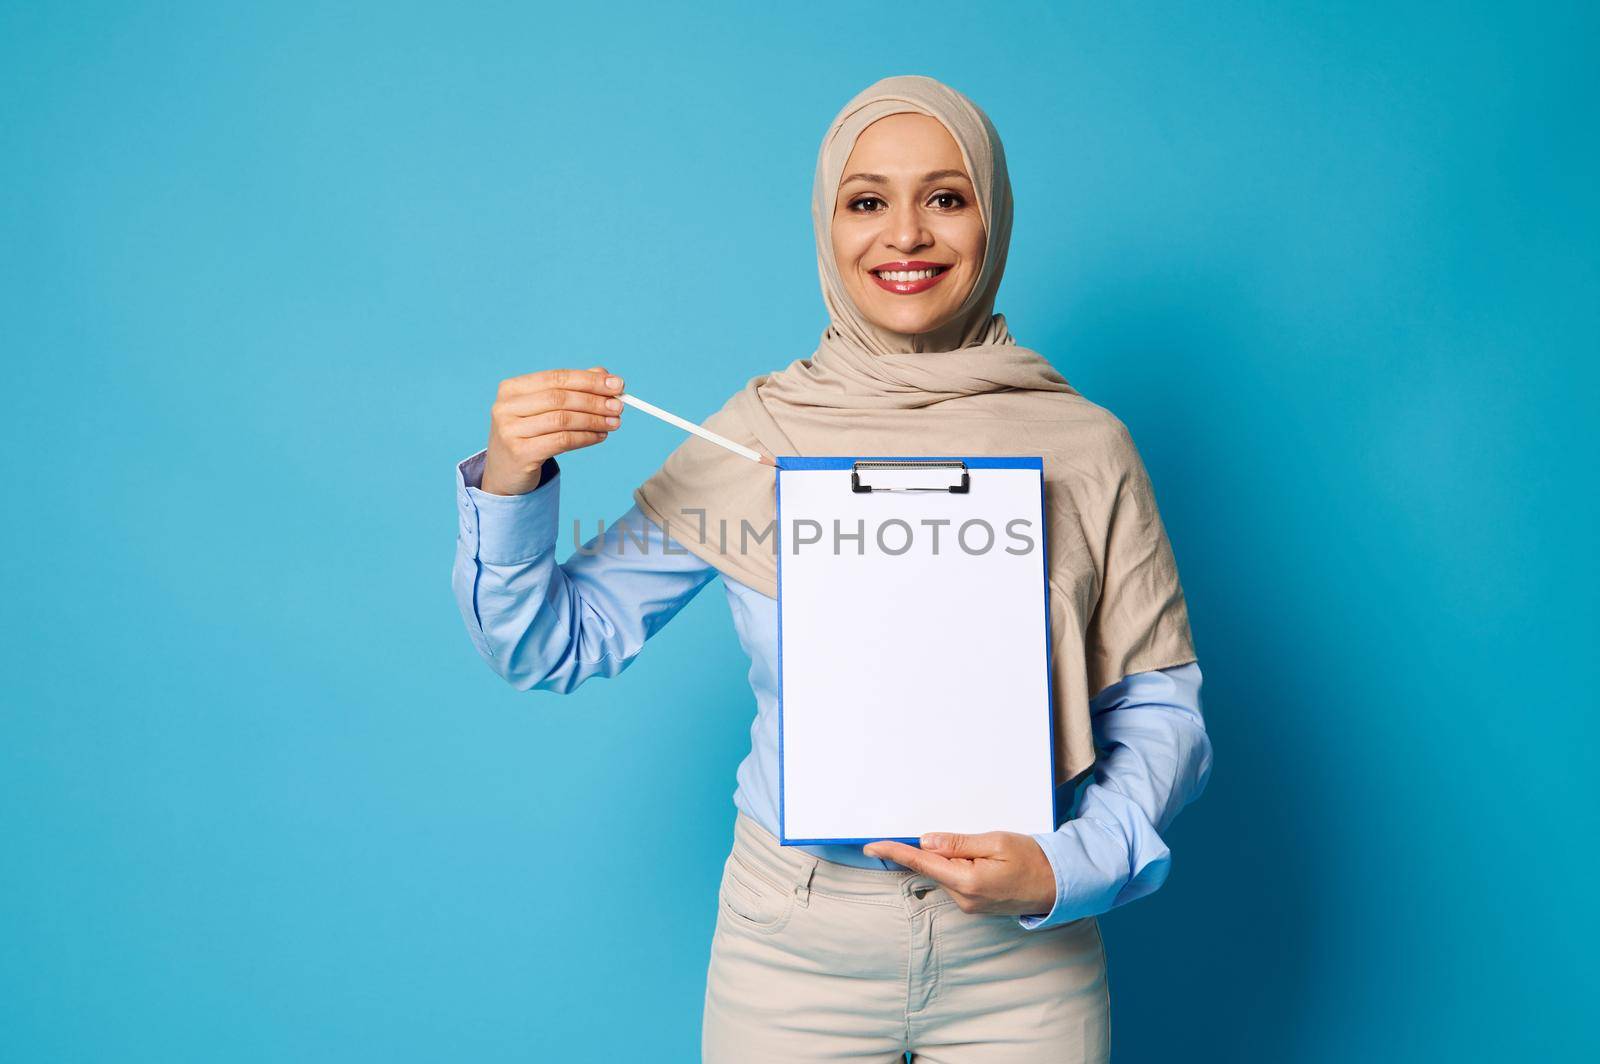 Smiling Arab woman with covered head in hijab pointing a pen on a blank surface on a white paper sheet in clipboard